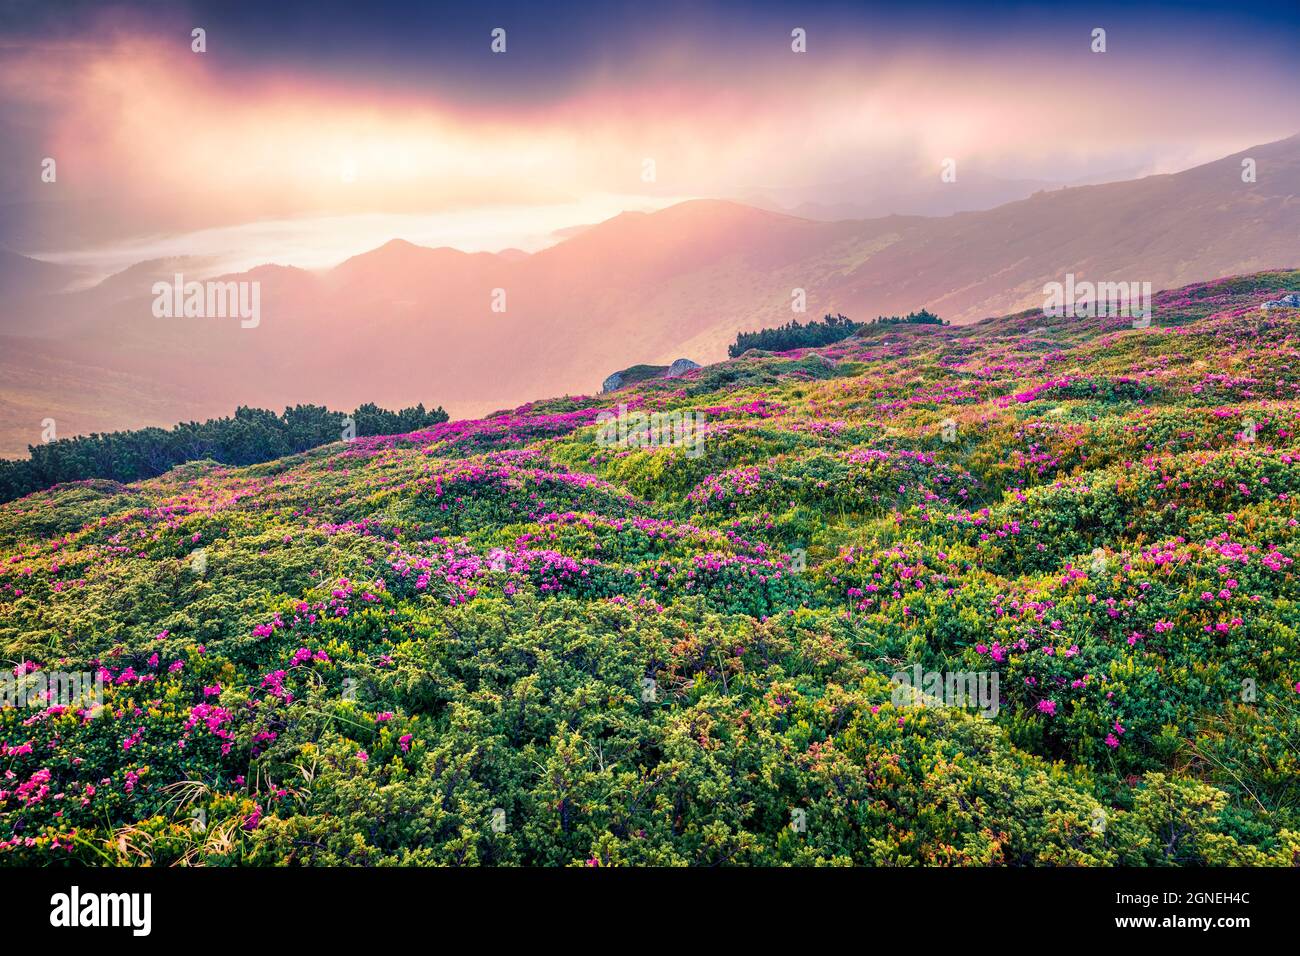 Colorful summer sunrise with fields of blooming rhododendron flowers. Splendid outdoors scene in the Carpathian mountains, Ukraine, Europe. Beauty of Stock Photo